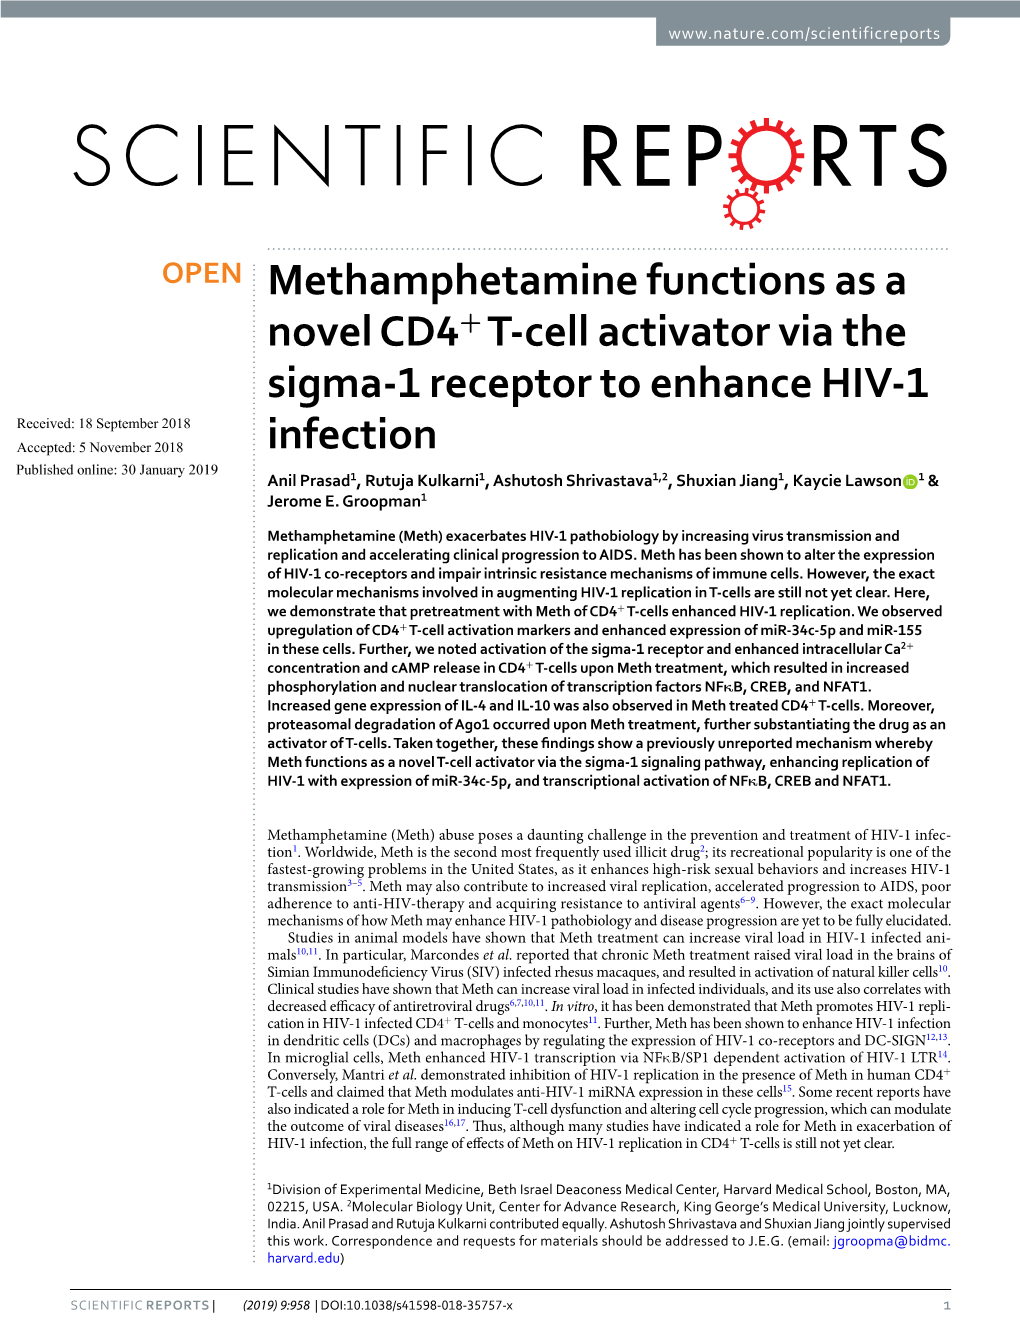 Methamphetamine Functions As a Novel CD4+ T-Cell Activator Via The